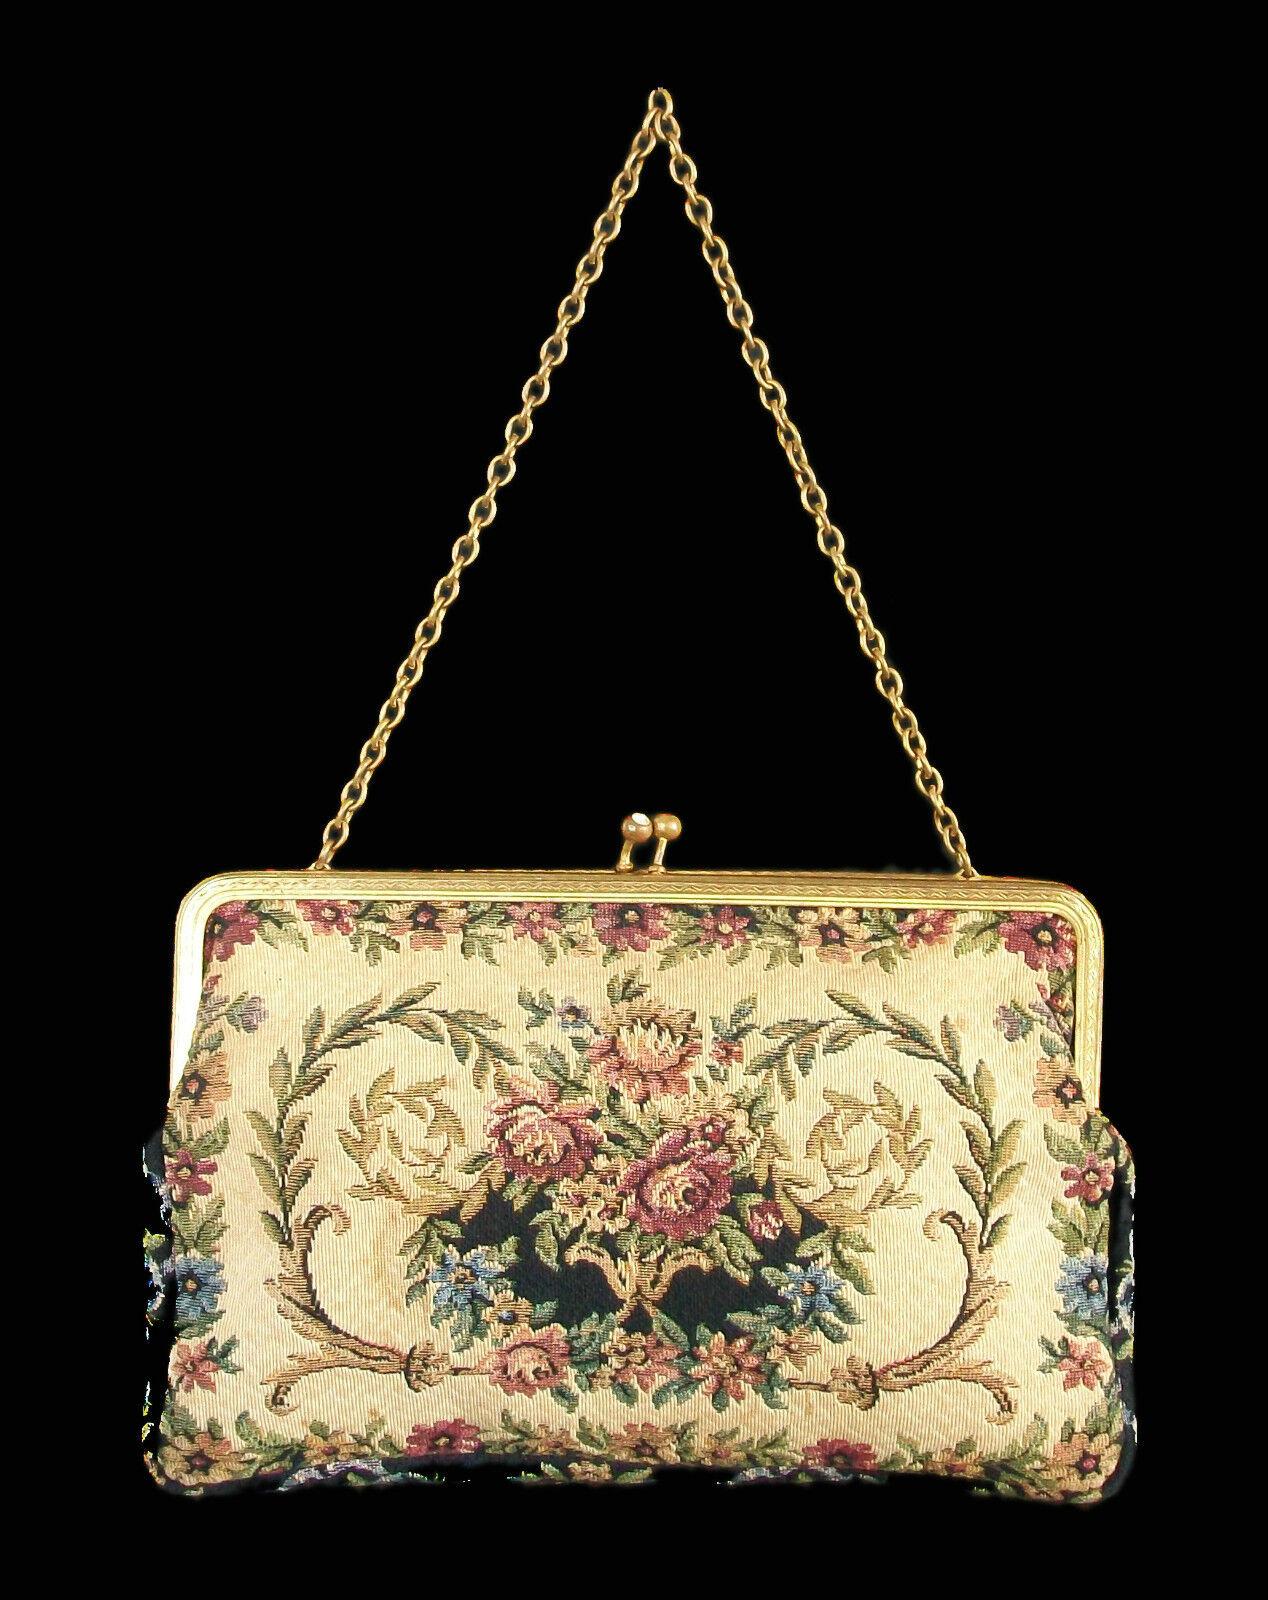 Vintage Tapestry Evening Bag - Rhinestone Closure - Unsigned - Mid 20th Century In Good Condition For Sale In Chatham, ON